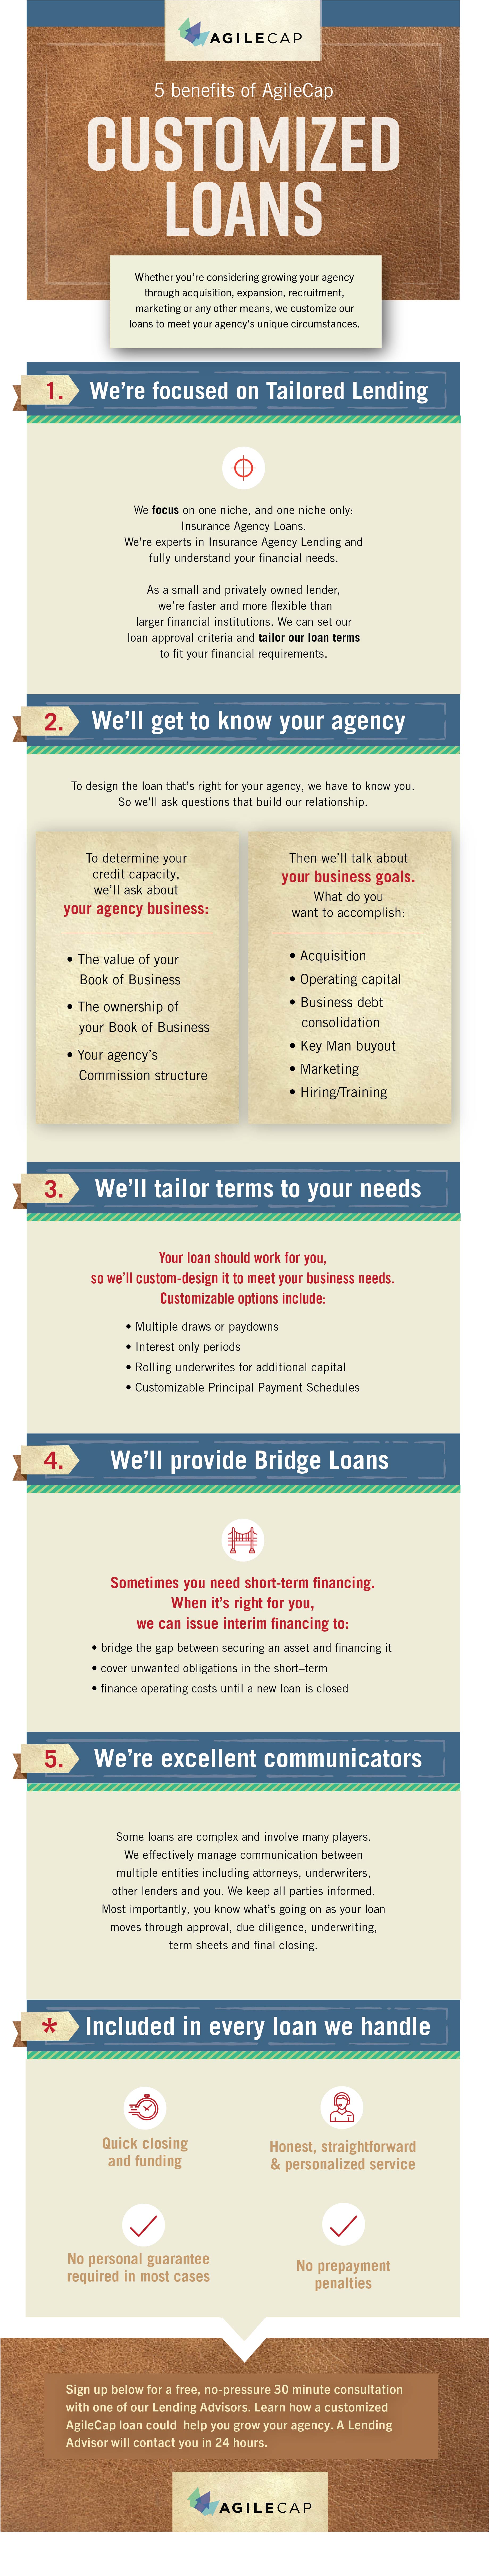 five benefits of AgileCap customized loans infographic